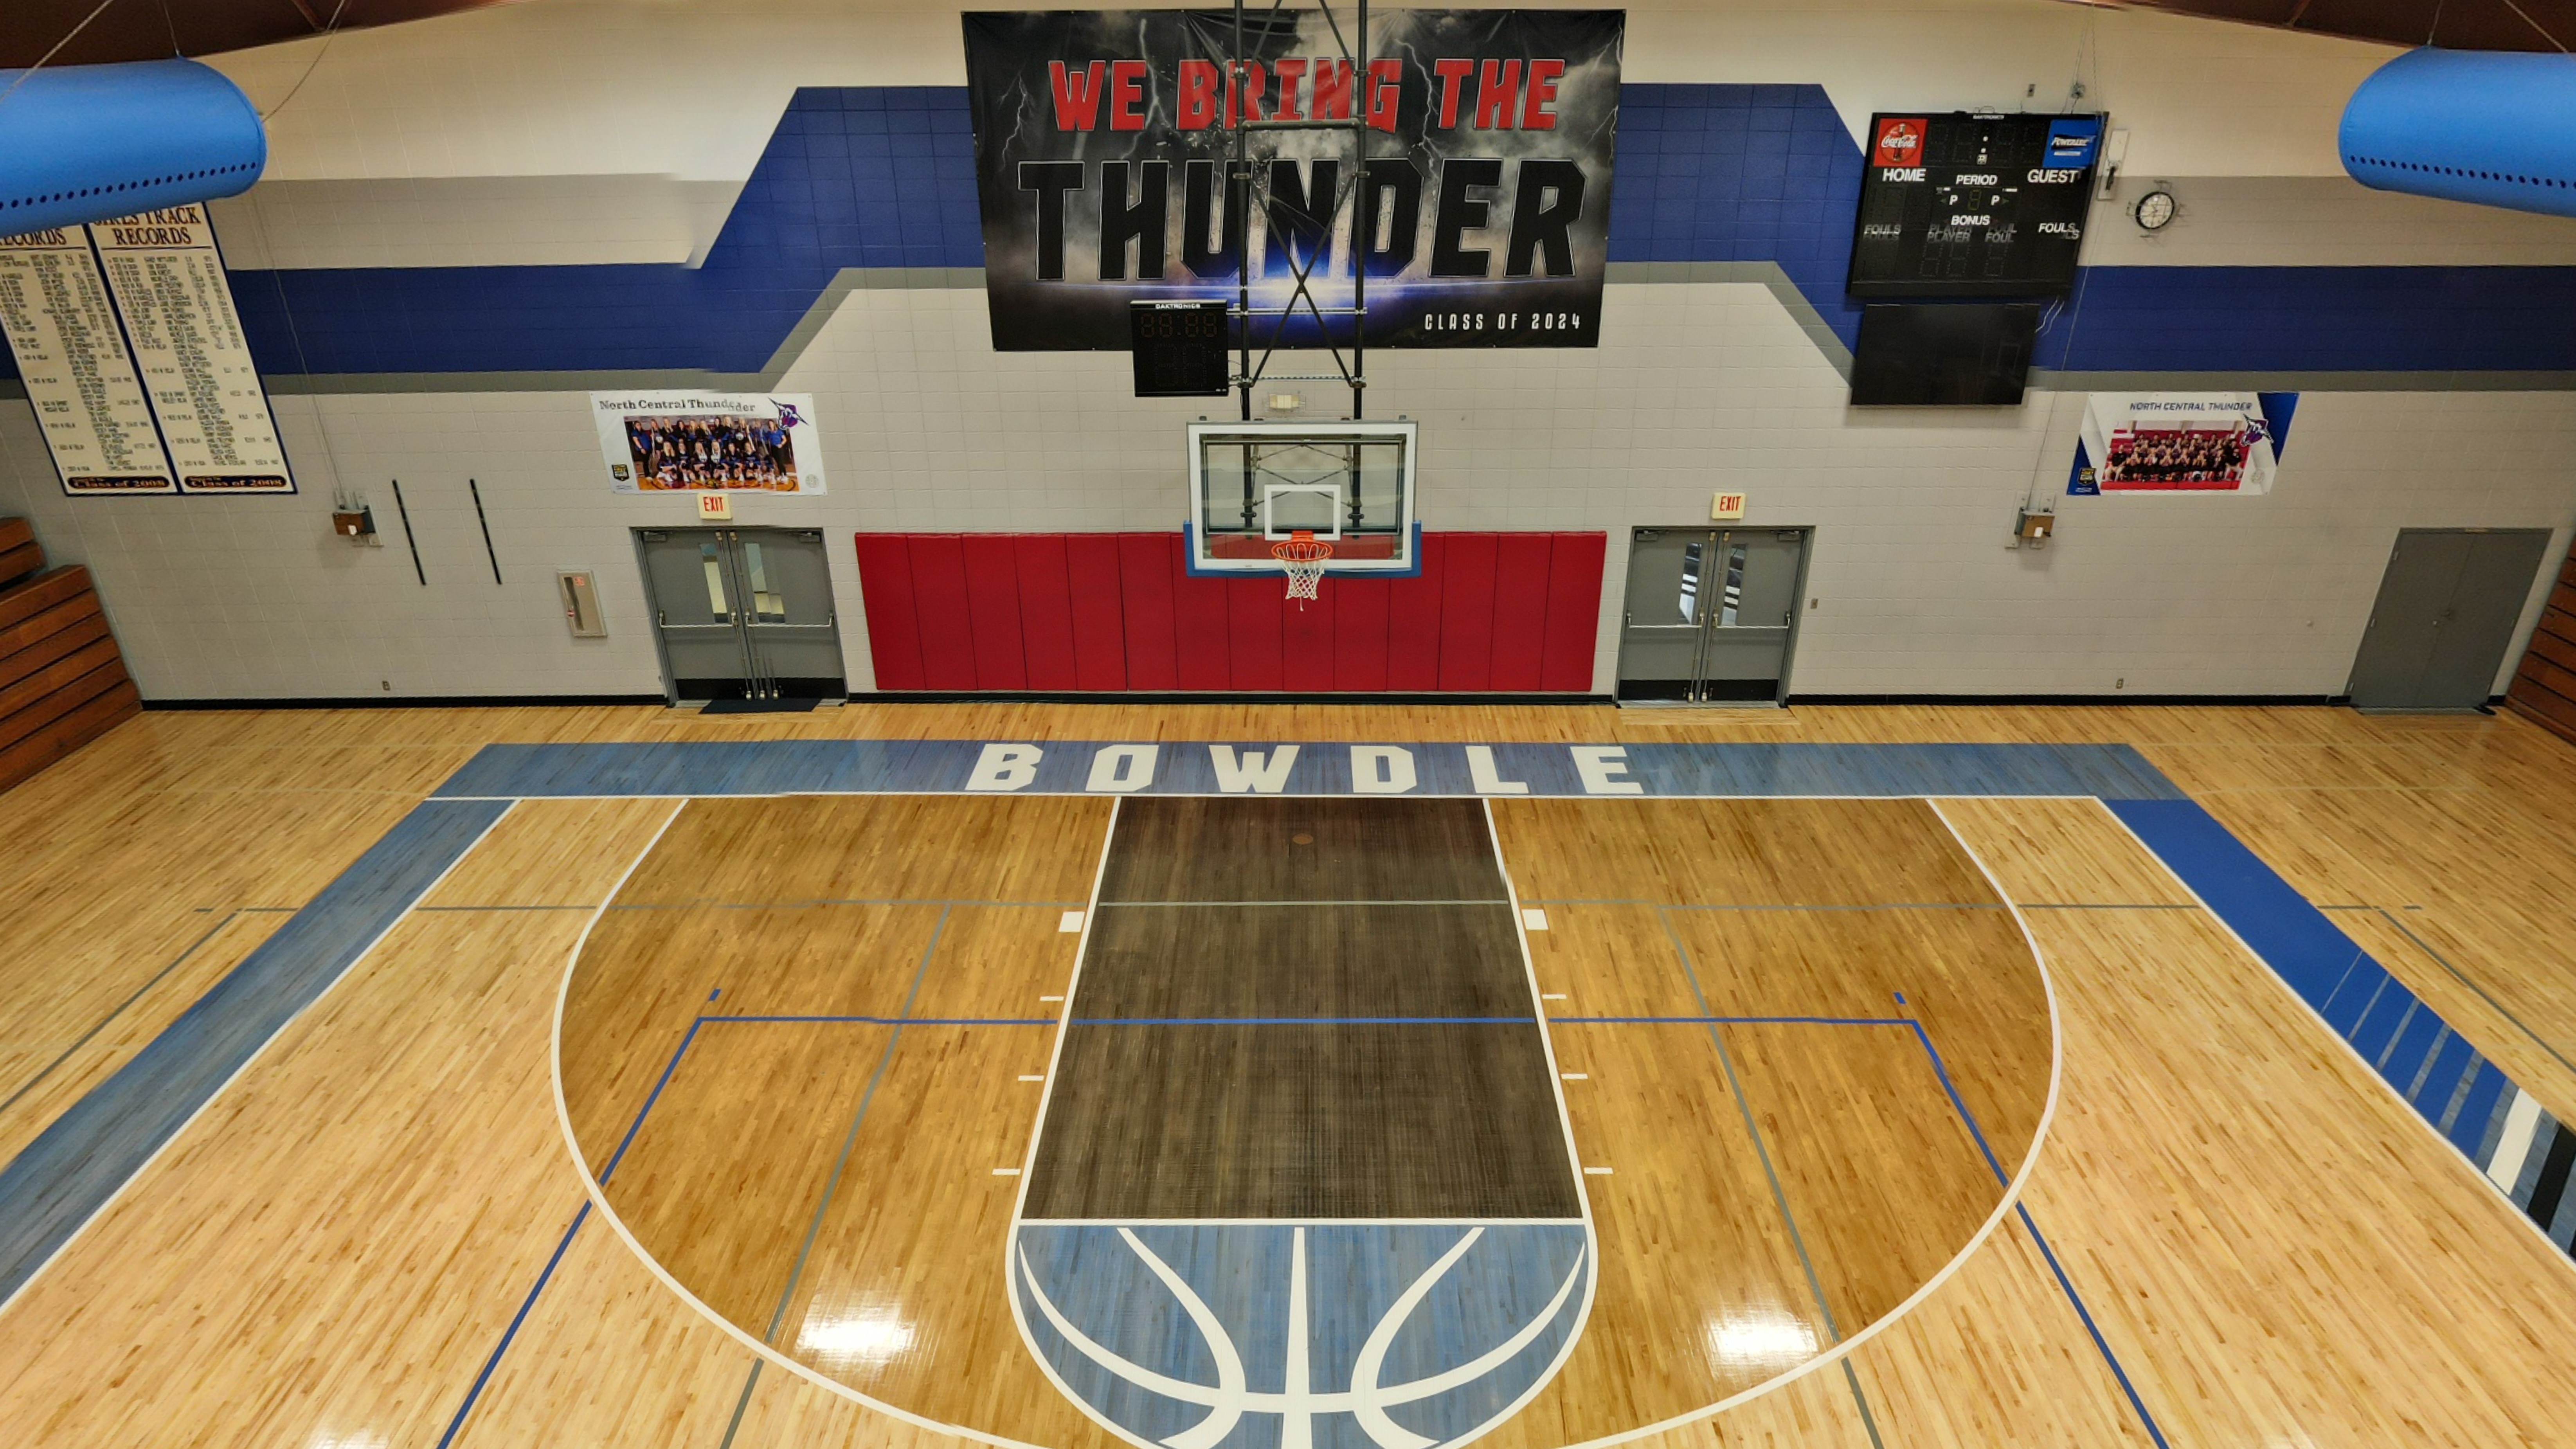 Home of the Thunder